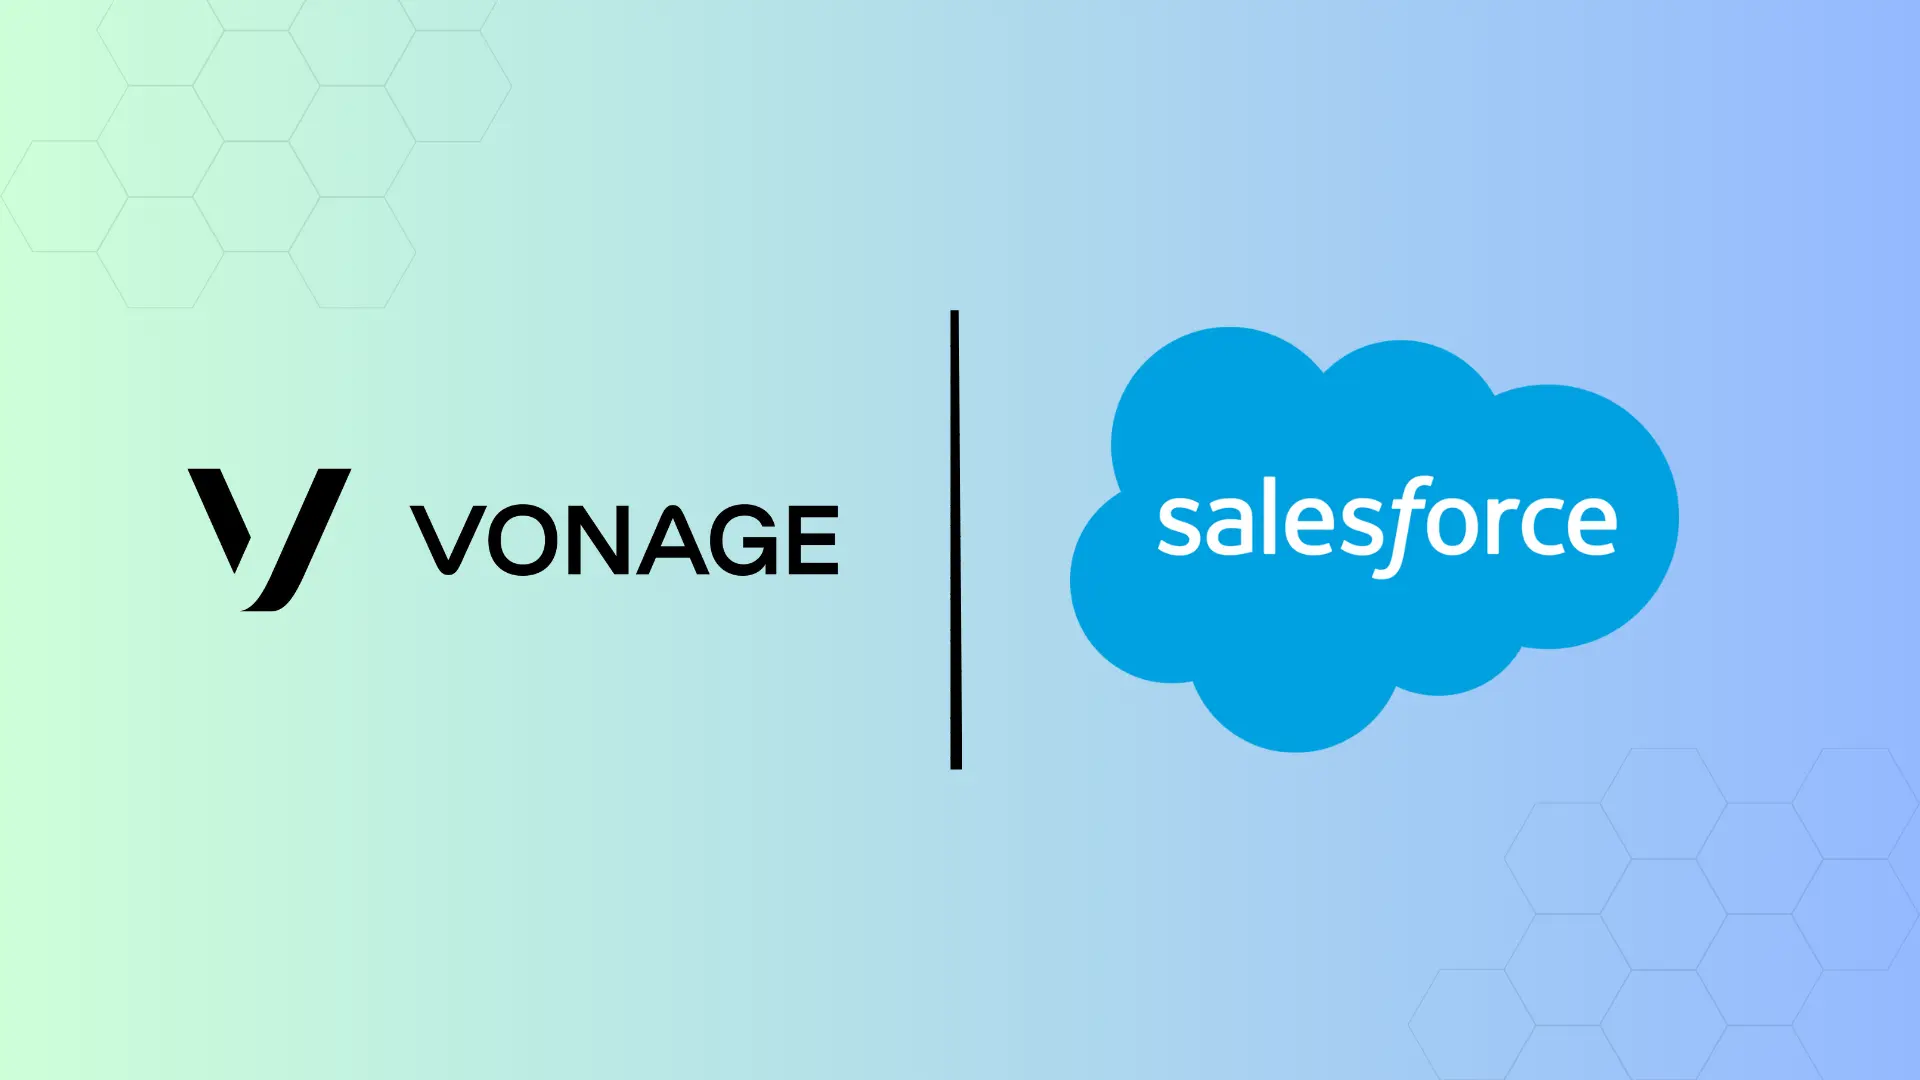 Vonage introduces new communication features to enhance Salesforce’s CX offerings